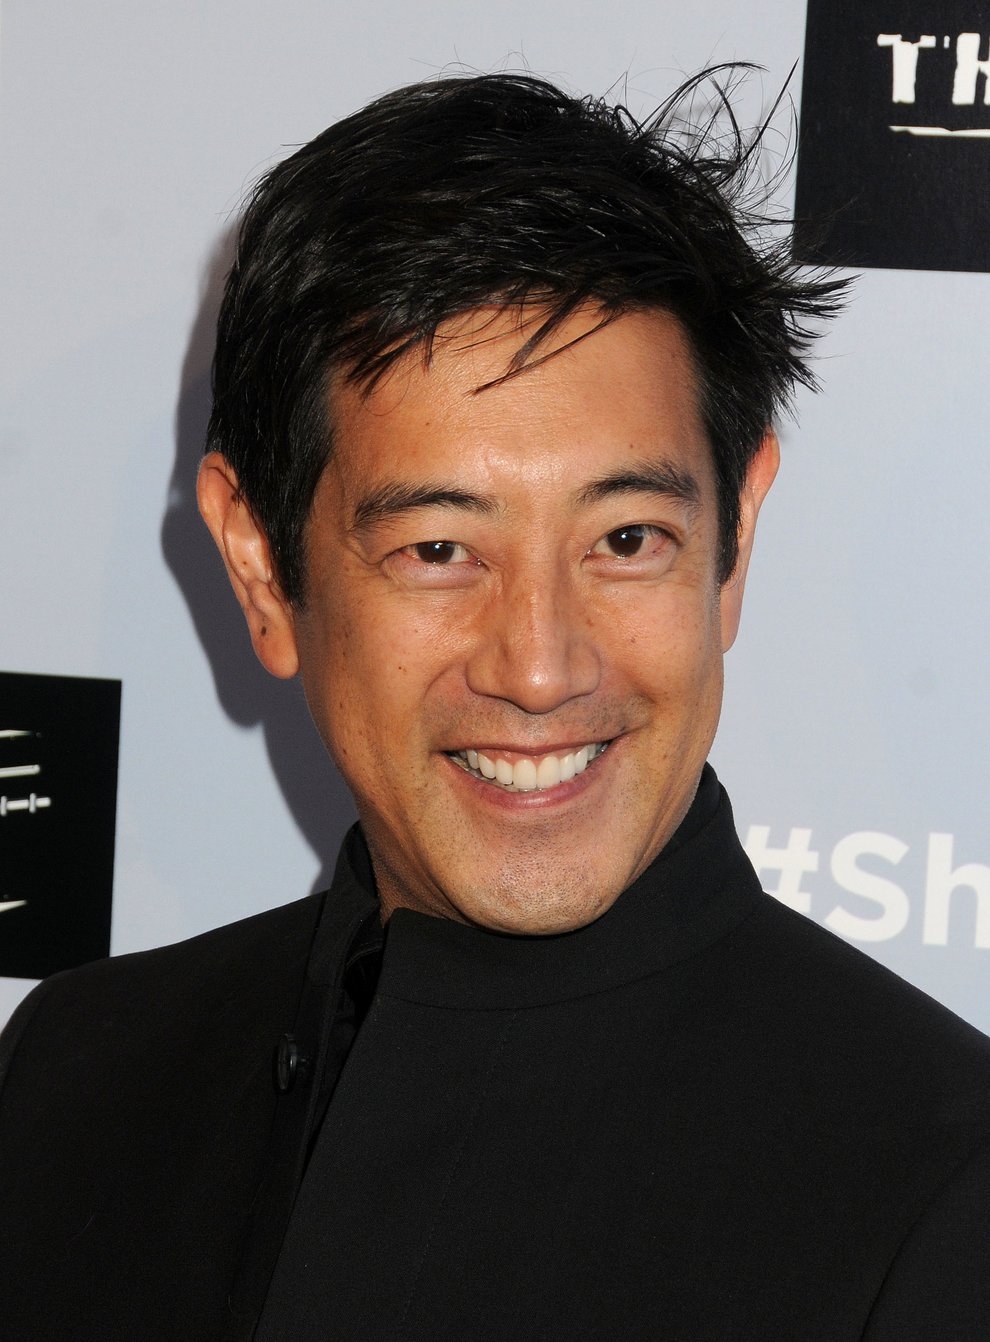 Grant Imahara has died, aged 49